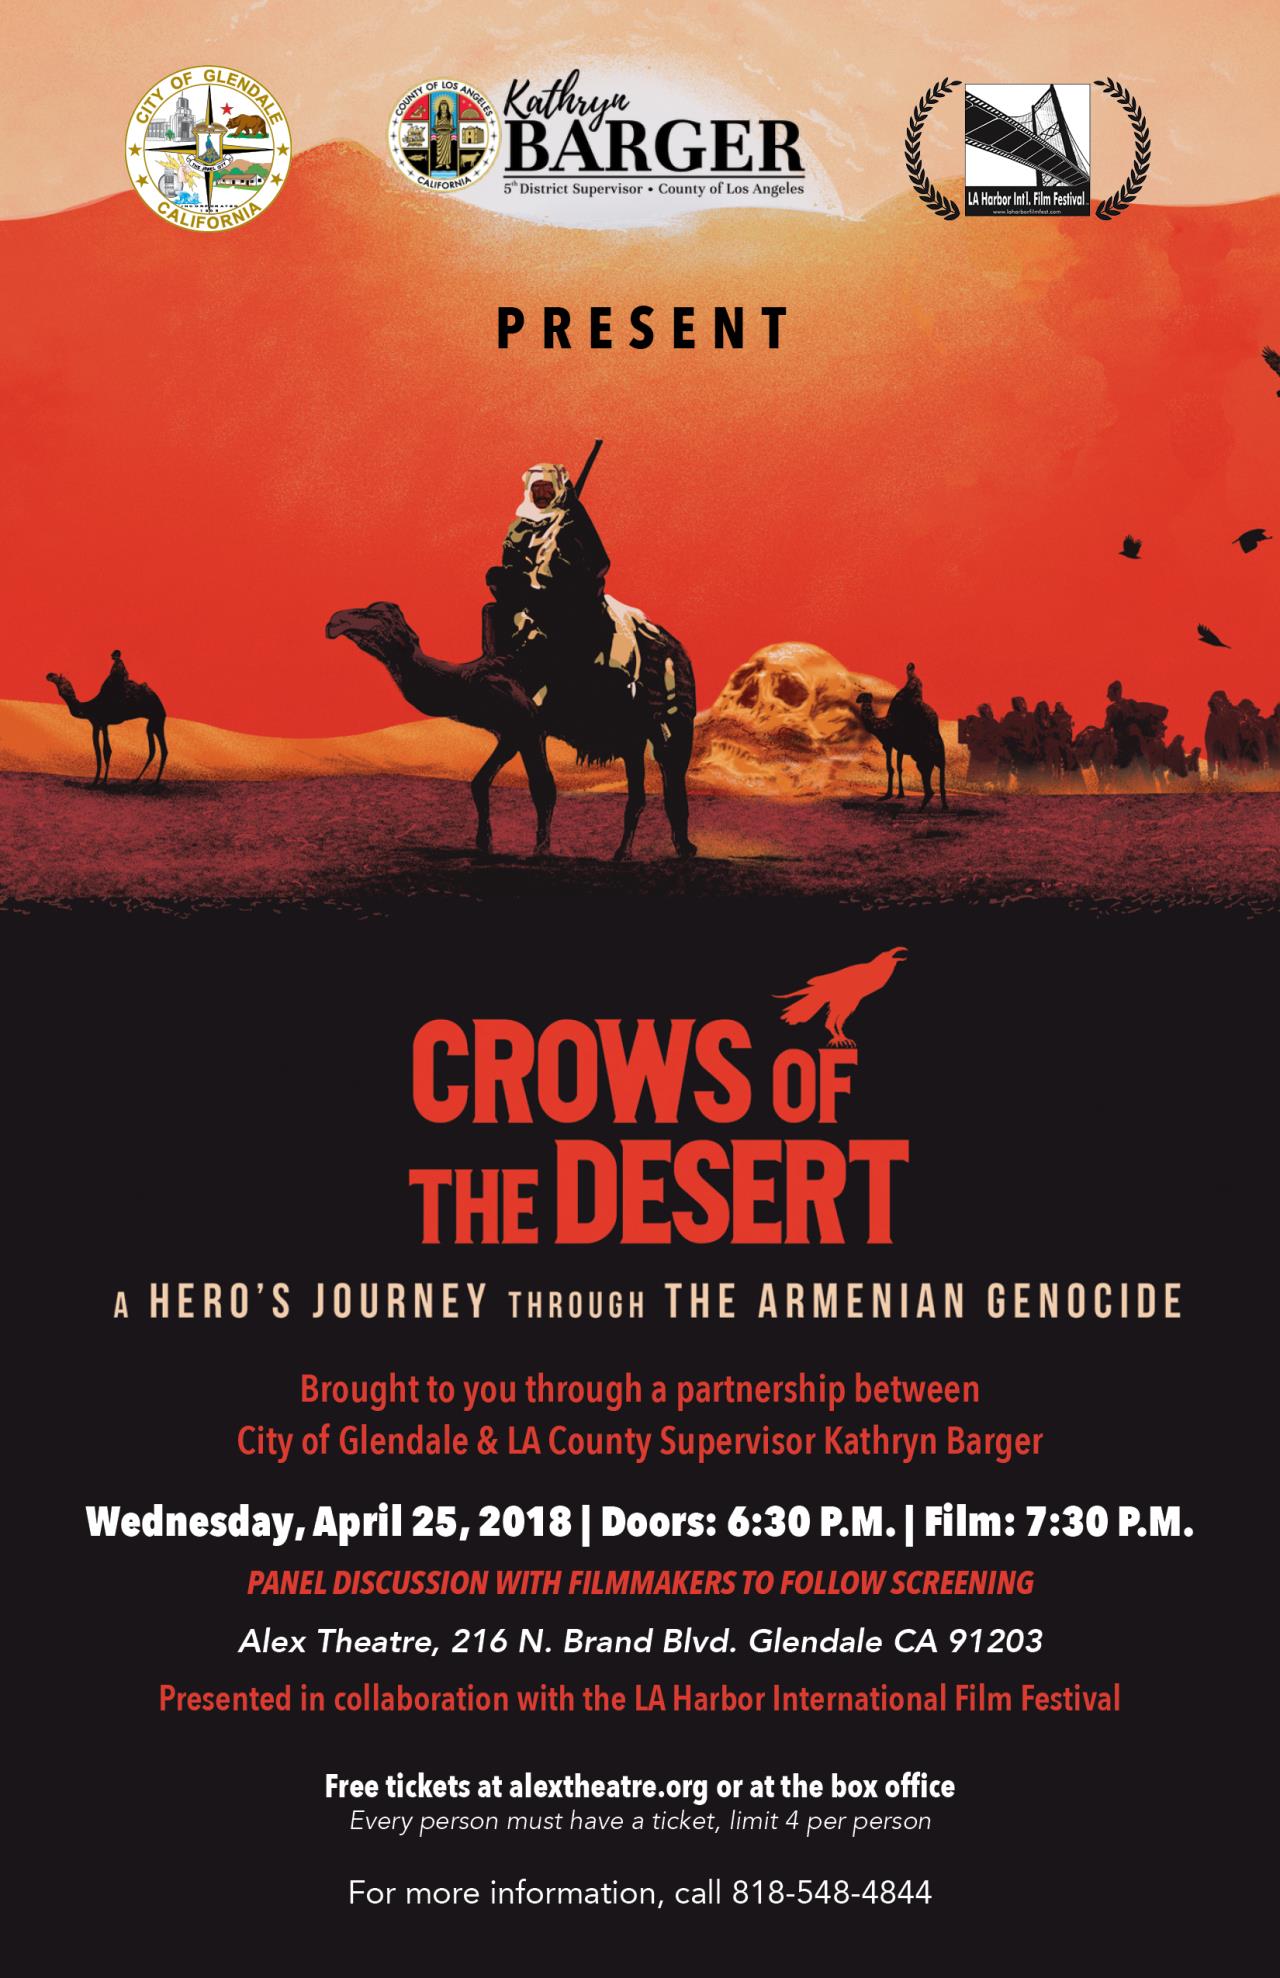 CrowsoftheDesert_flyer